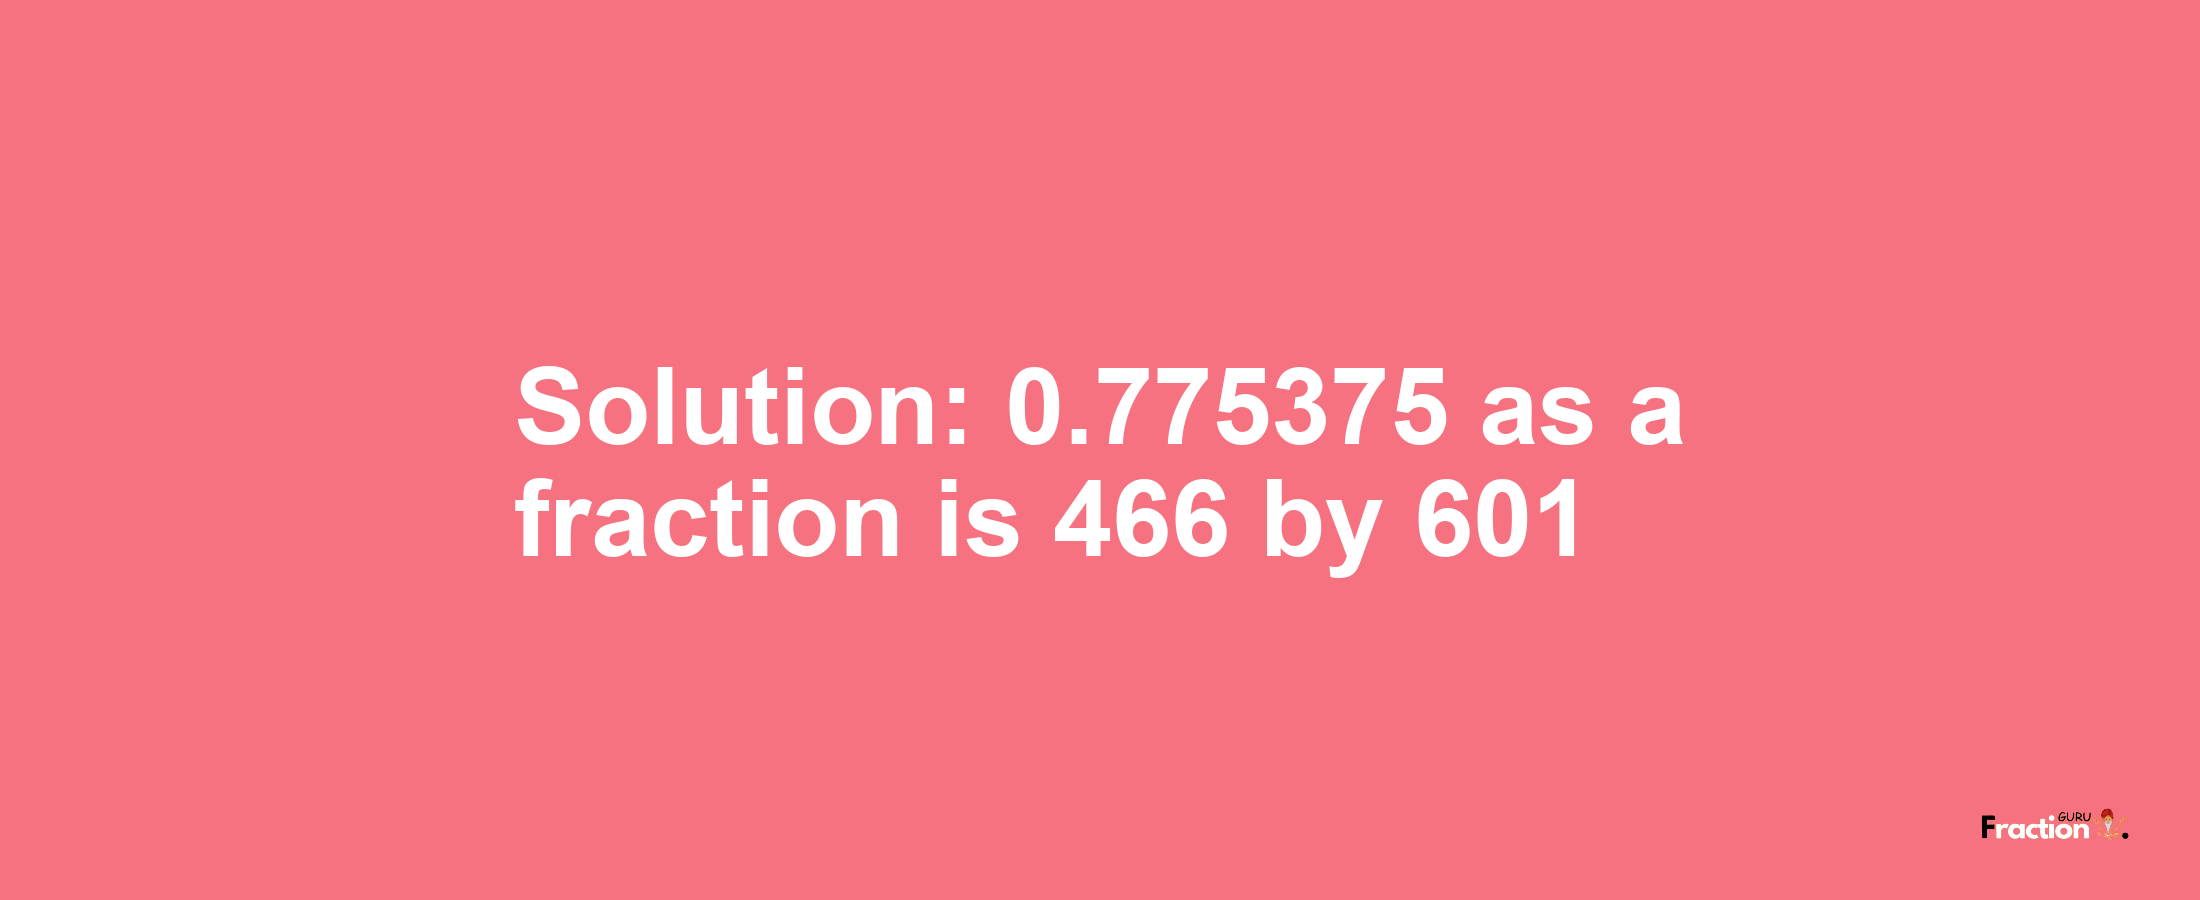 Solution:0.775375 as a fraction is 466/601